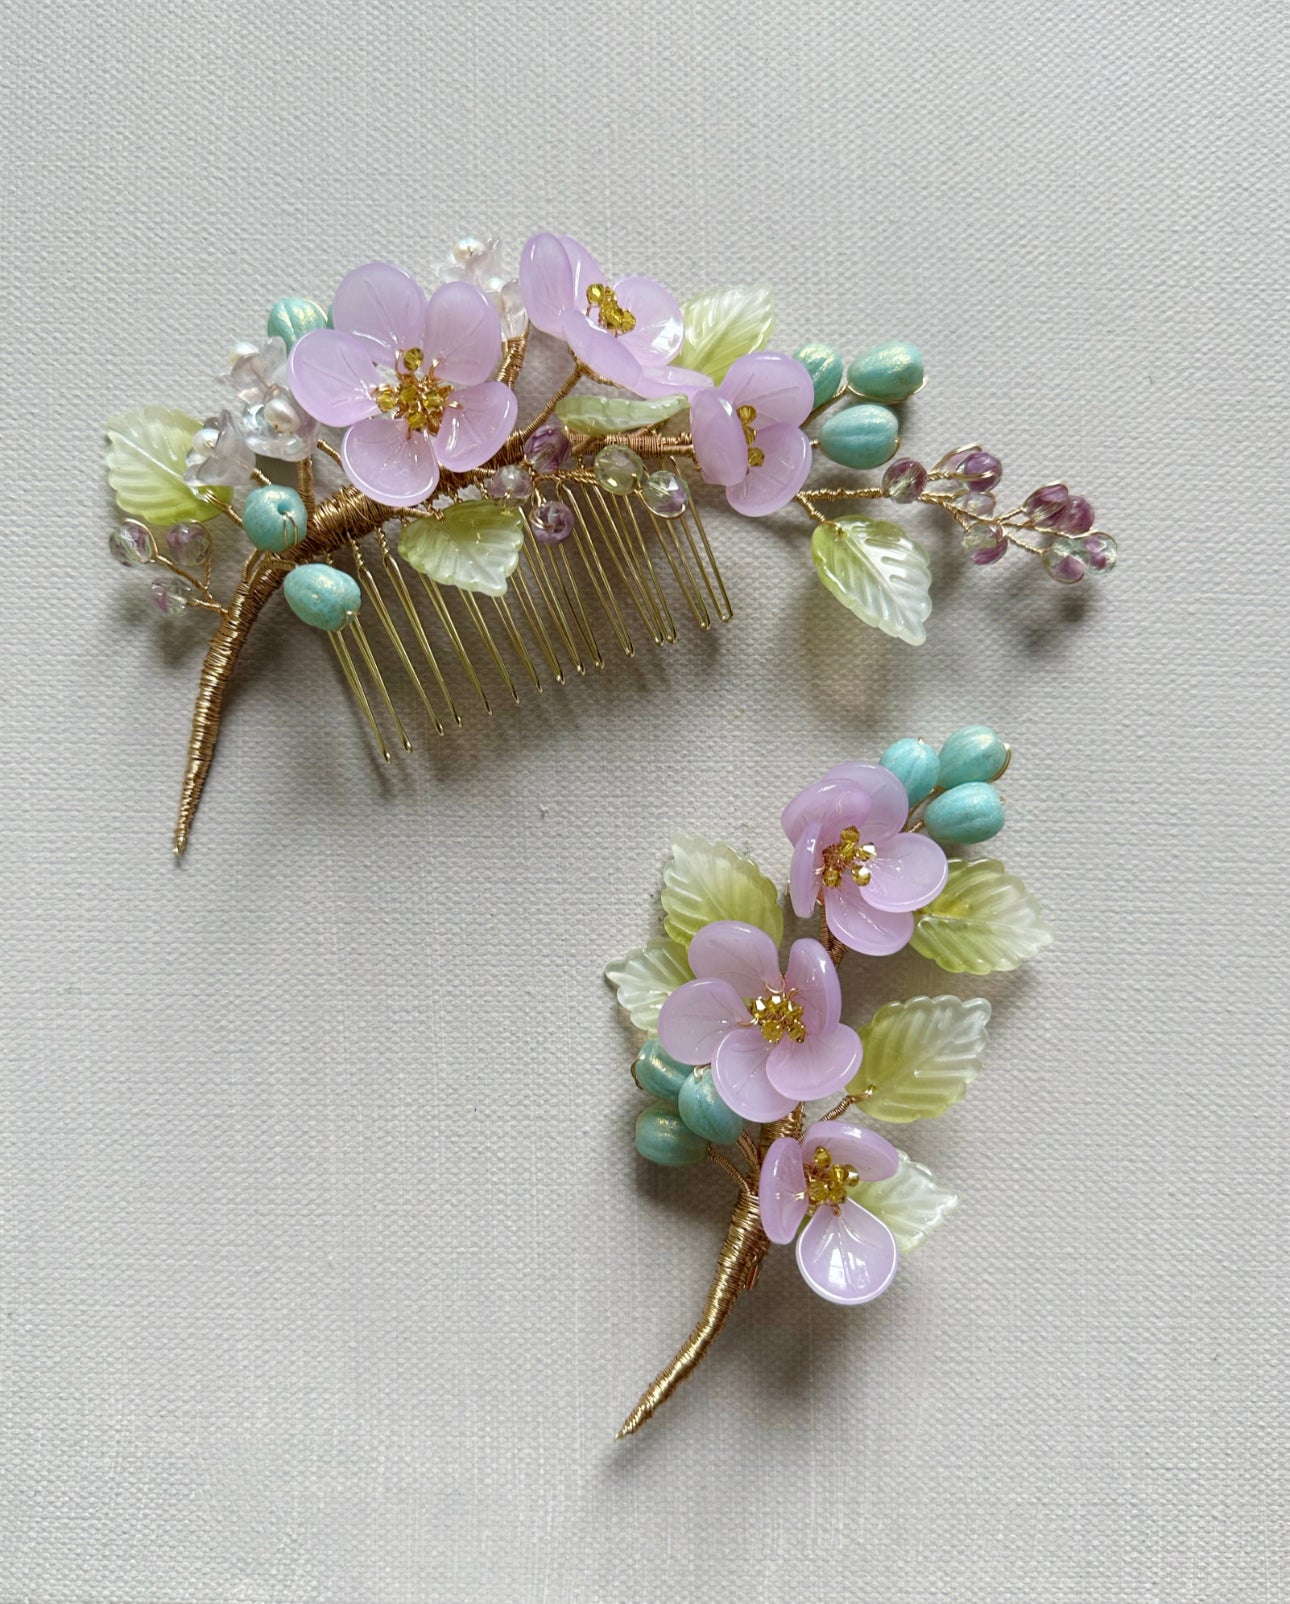 《Anita's Spring Garden》luxurious plum blossom and lily of the valley wedding hair slide